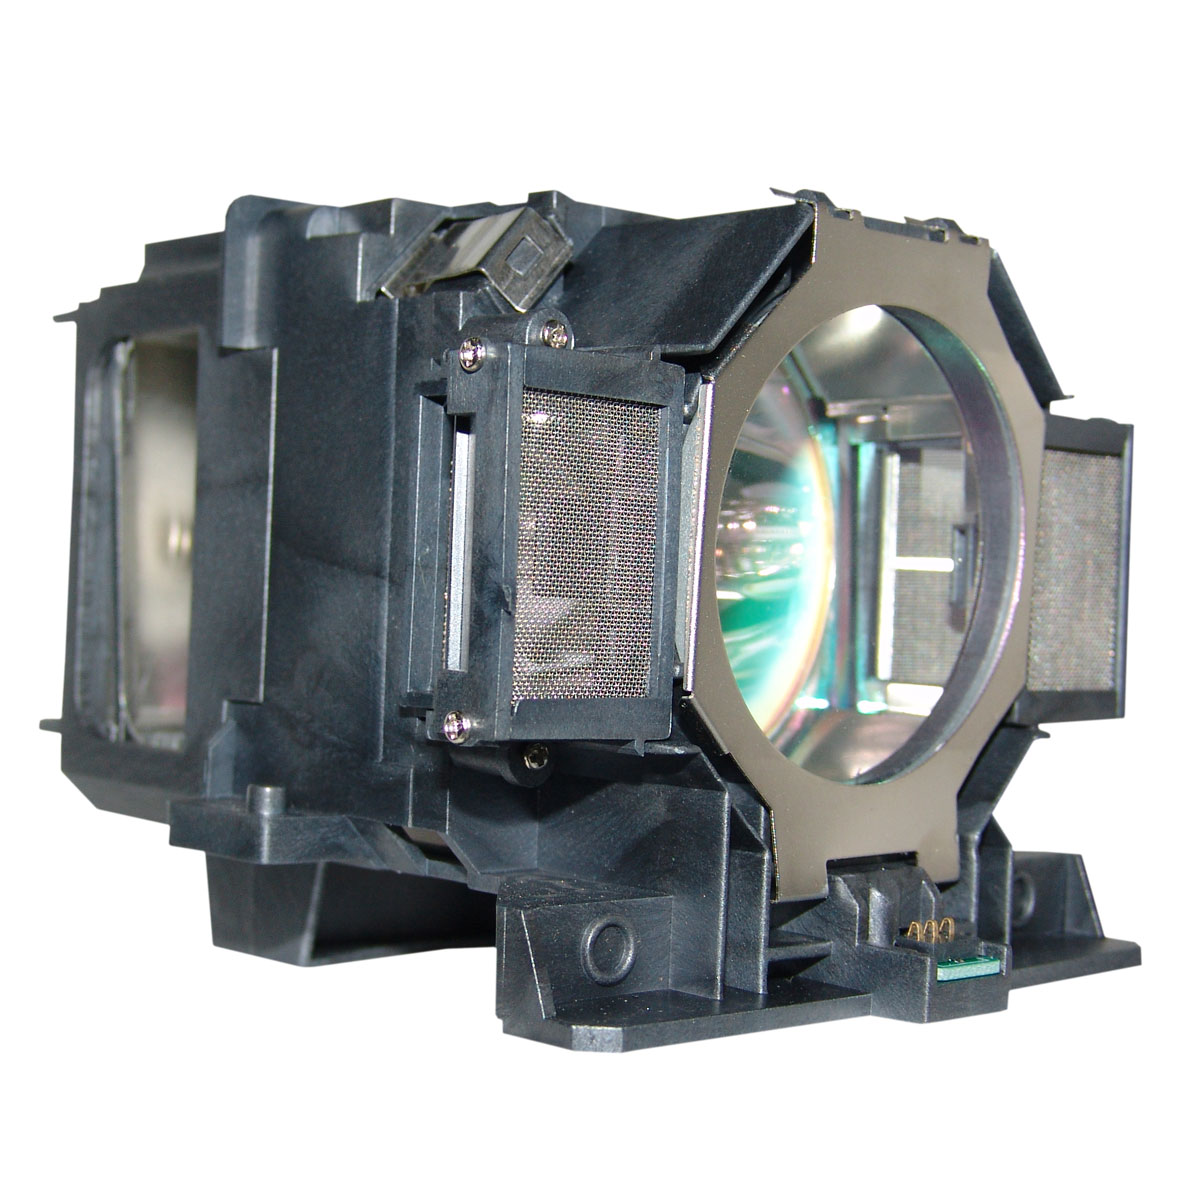 Epson Generic Complete EPSON EB-Z9900W (Portrait) (Dual Lamp) Projector Lamp projector. Includes 1 year warranty.